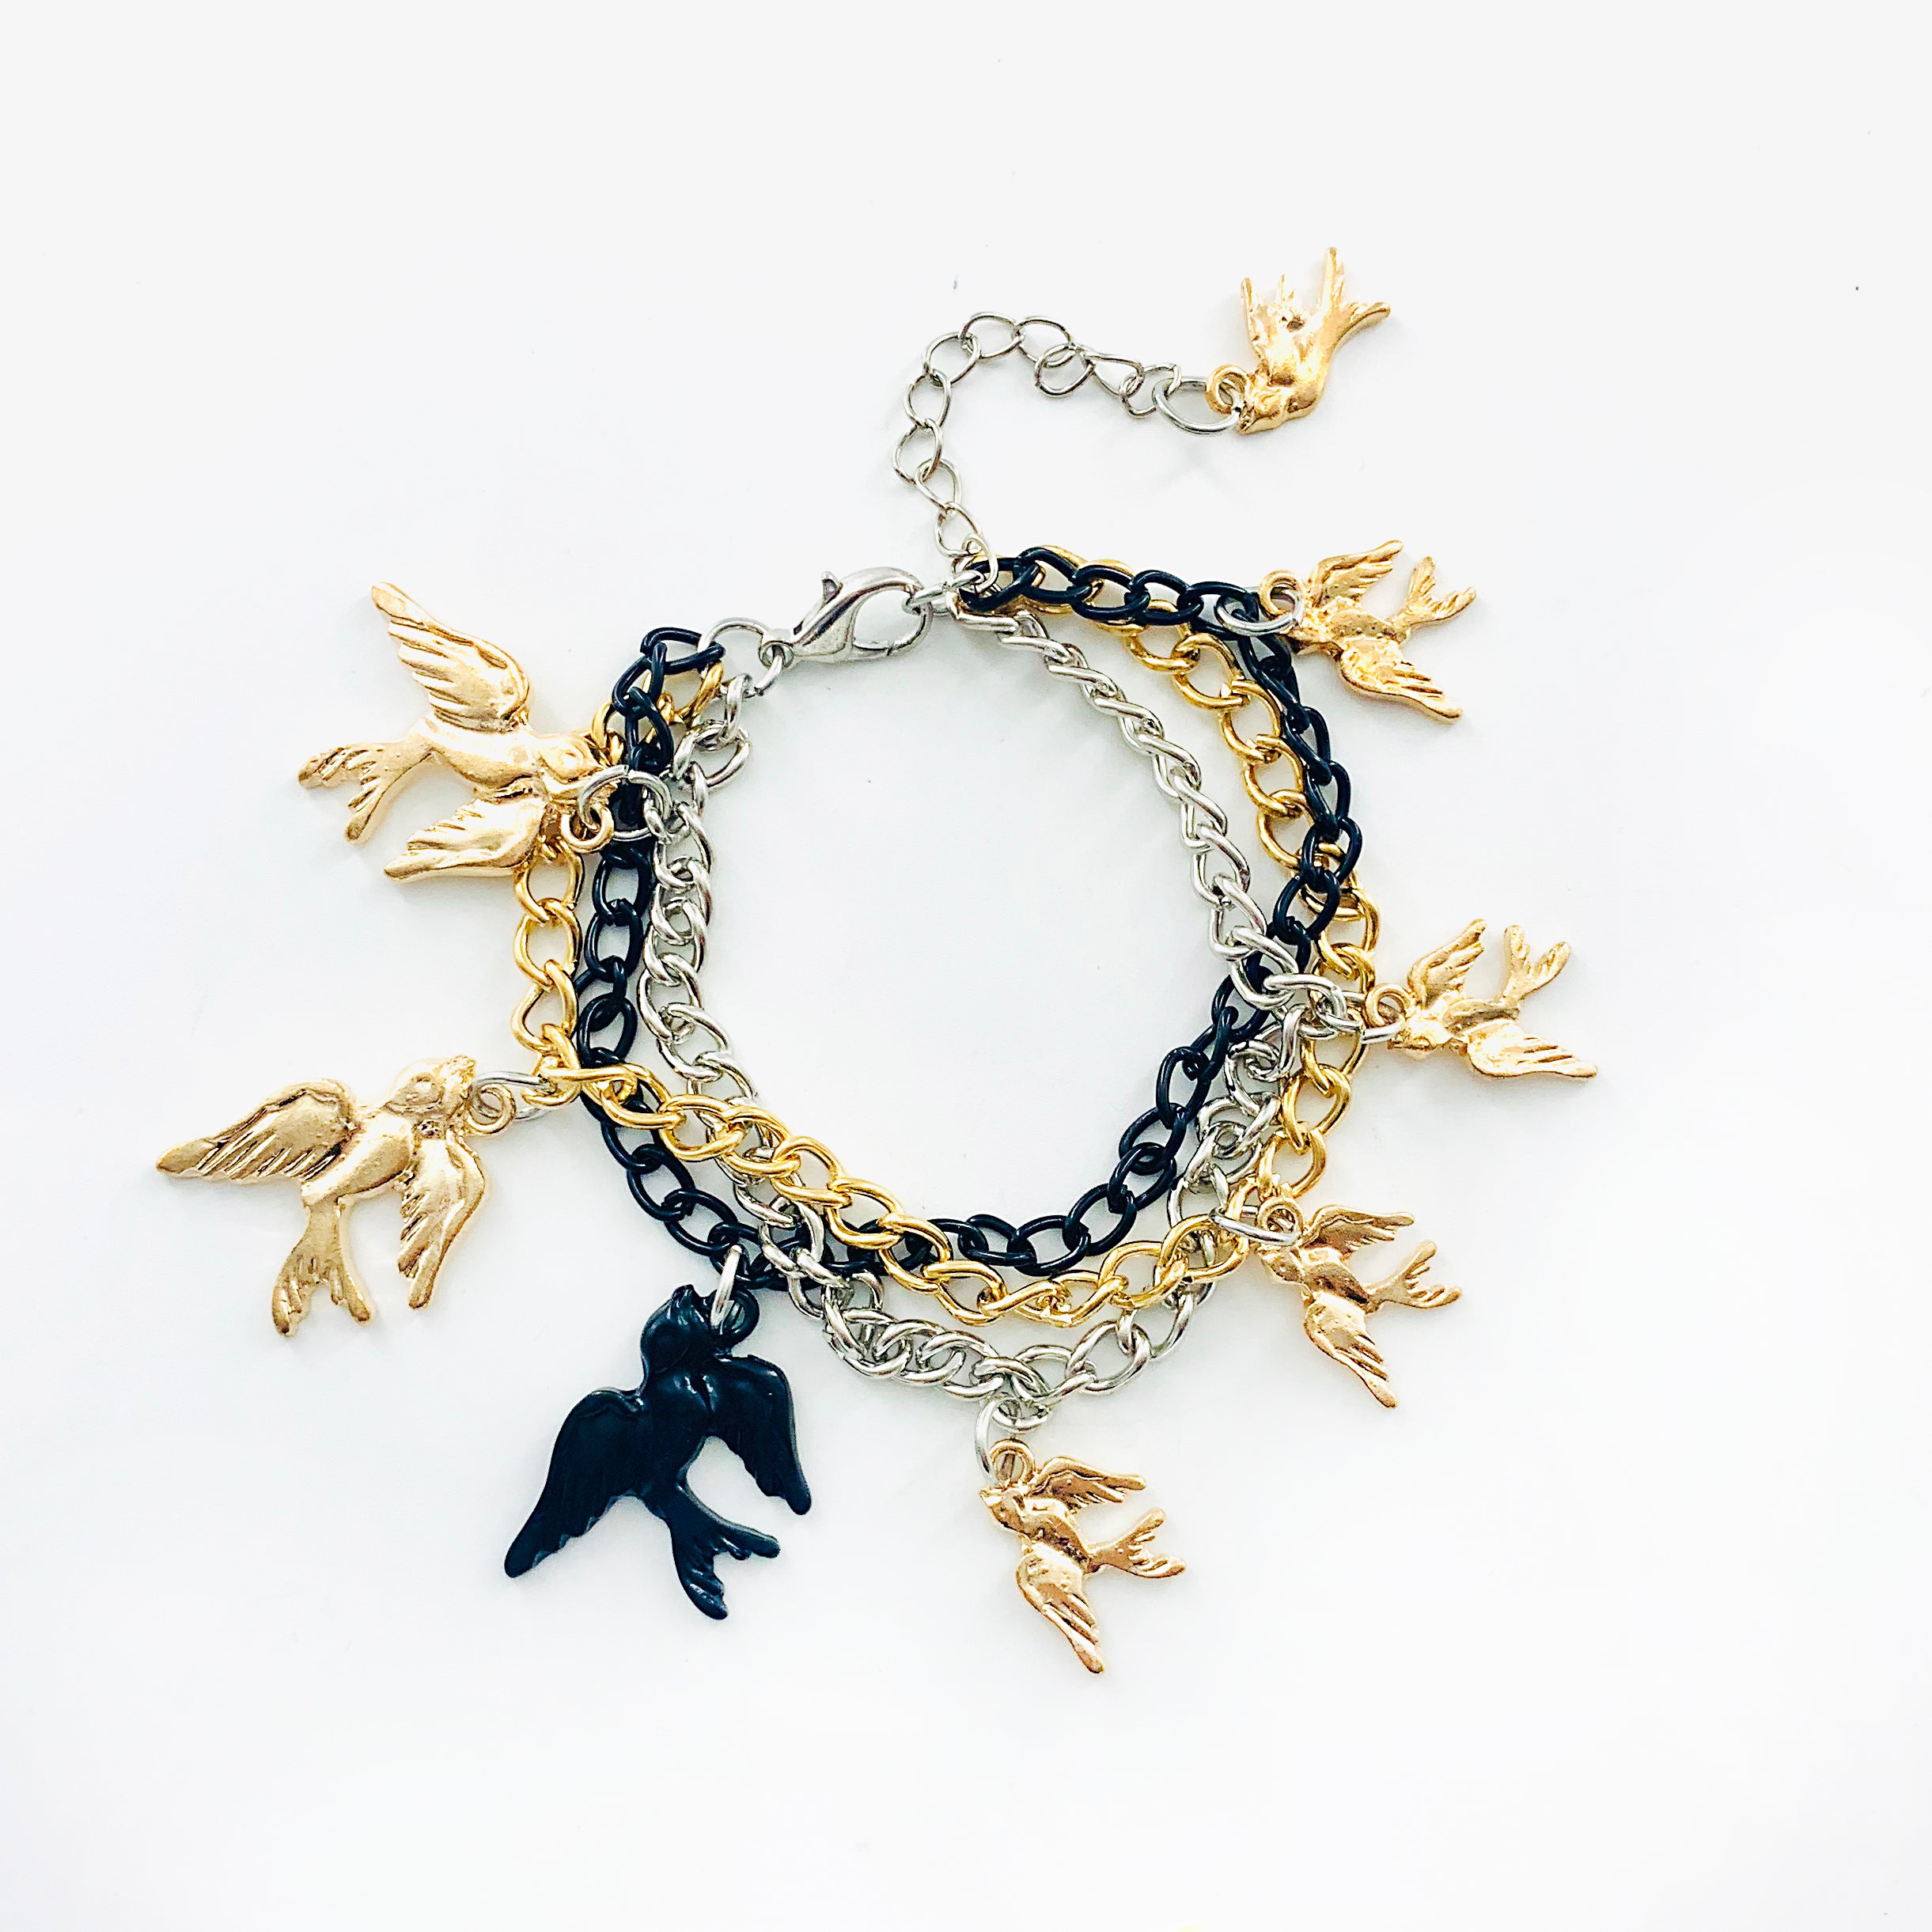 Silver, Gold and Black Chains with Swallow Charms